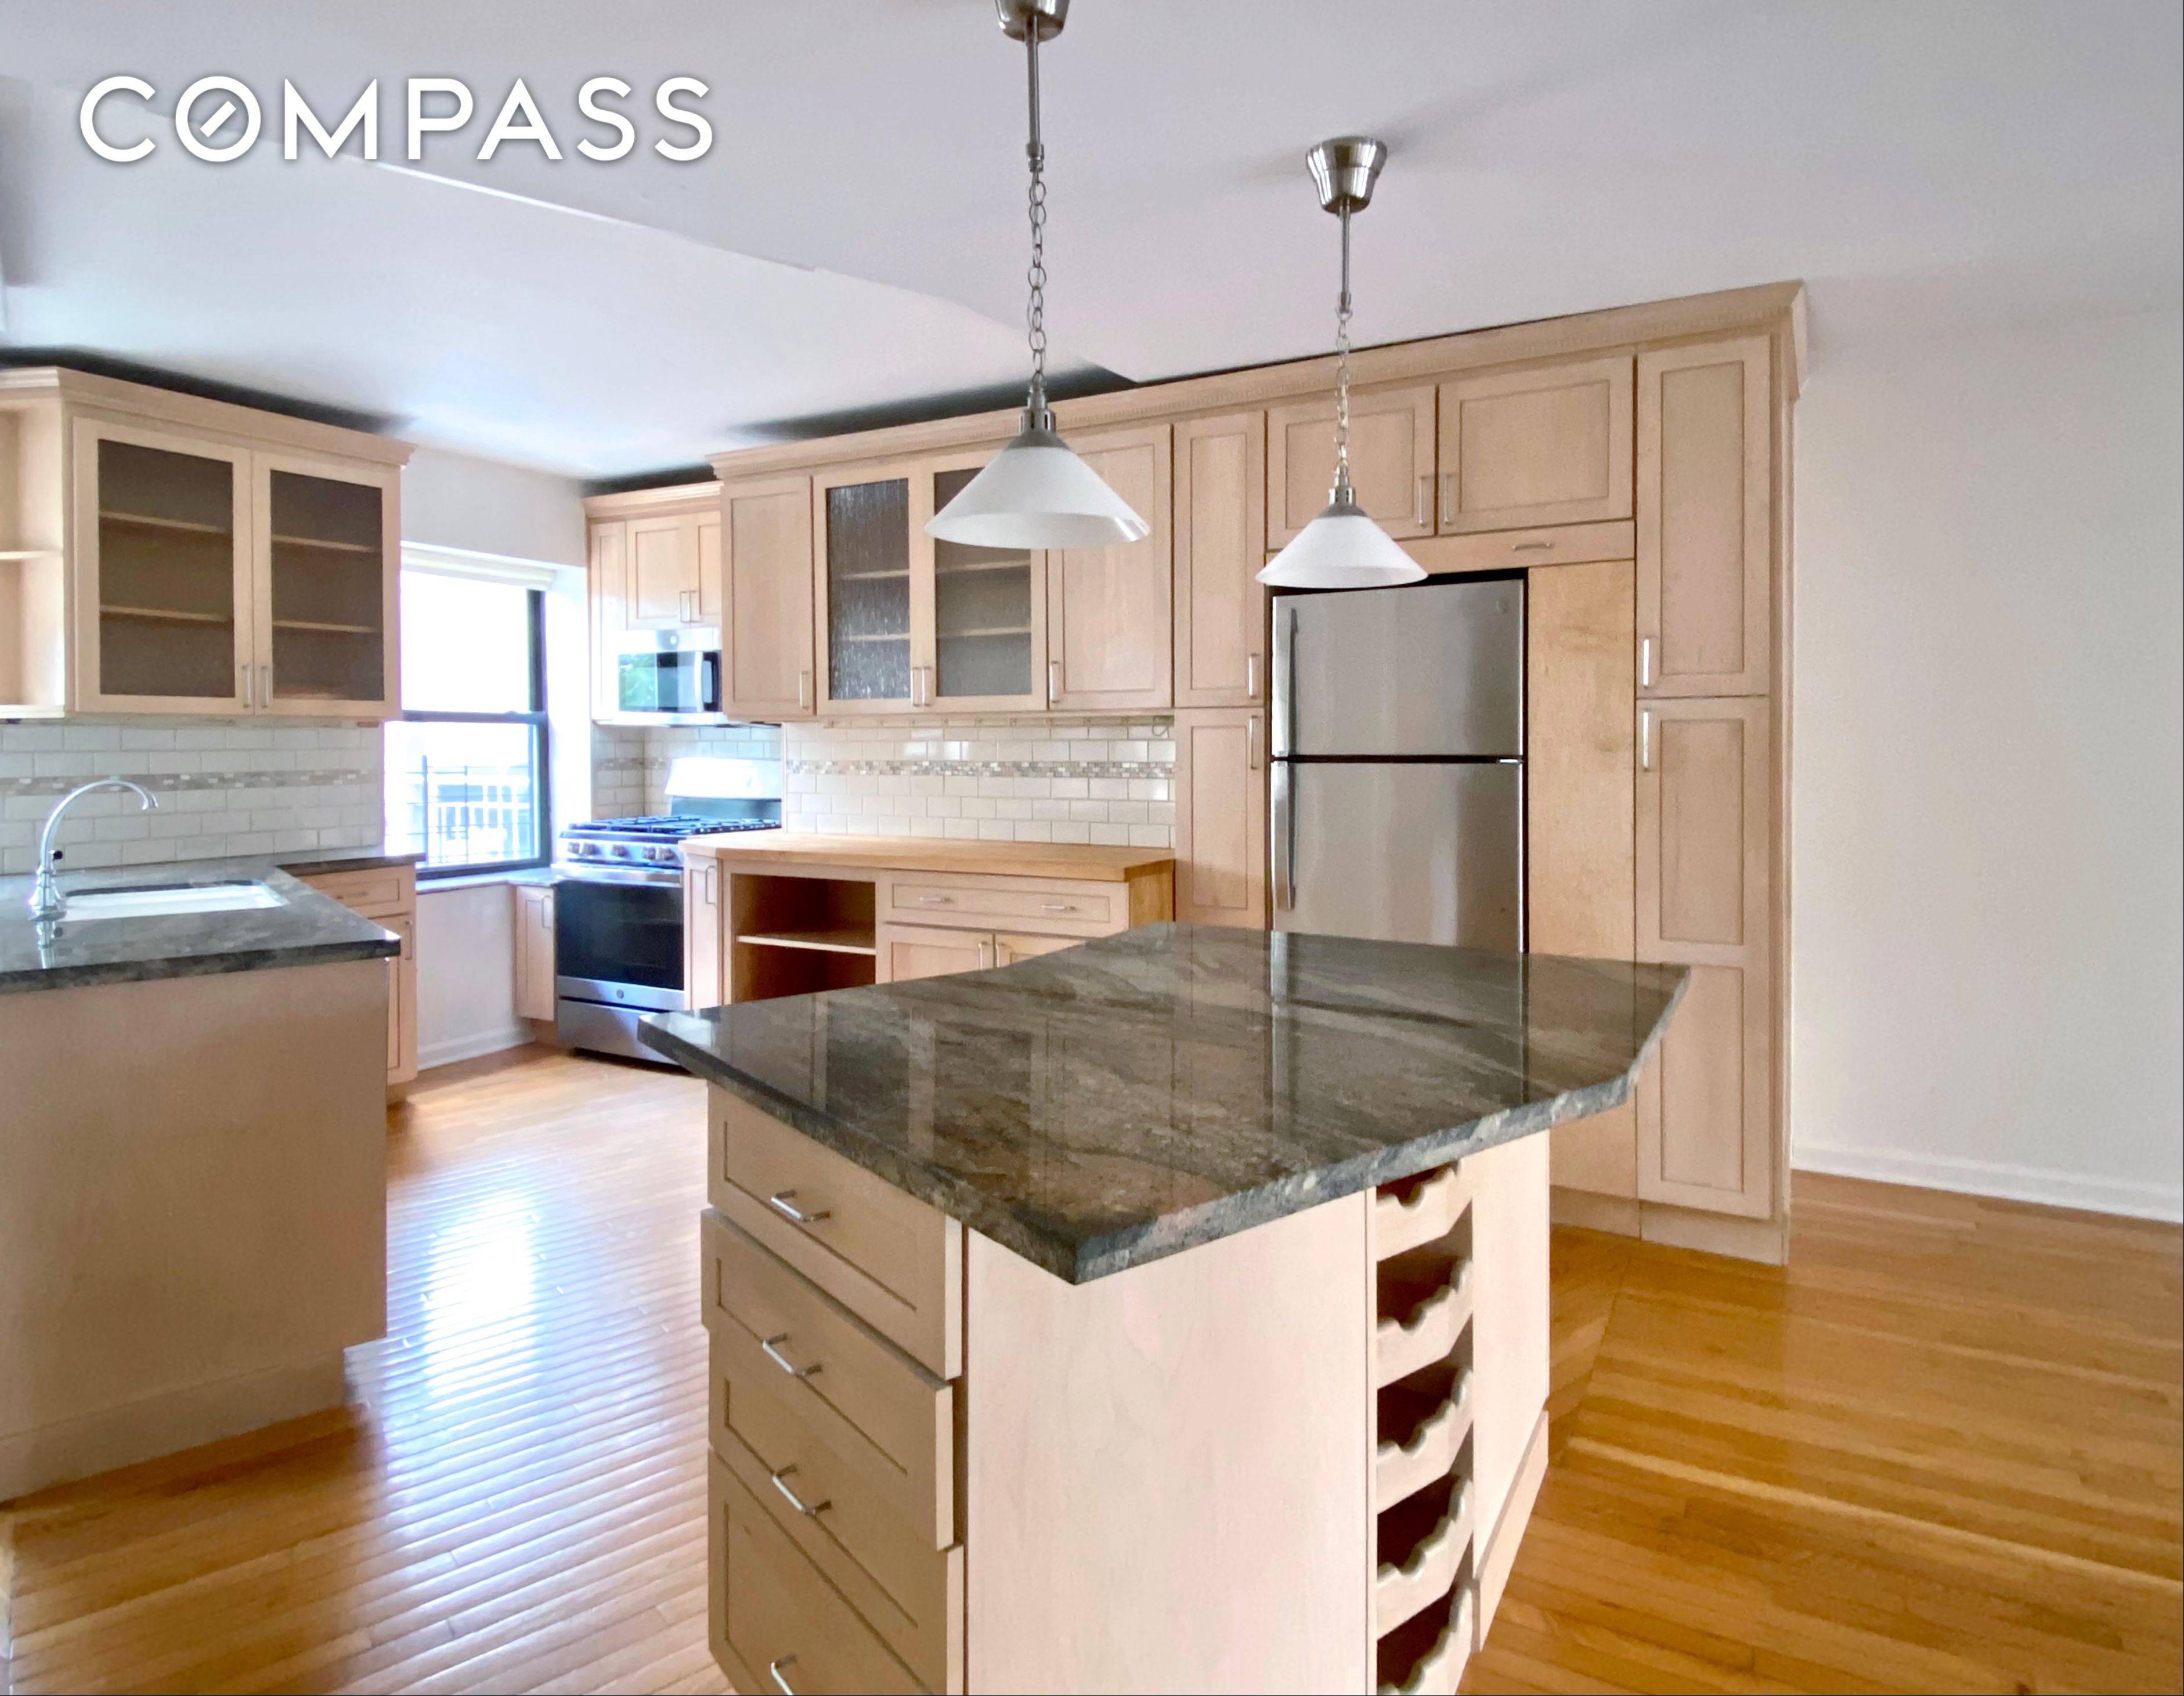 Space, light, flexibility, comfort, and style in the heart of Cobble Hill !